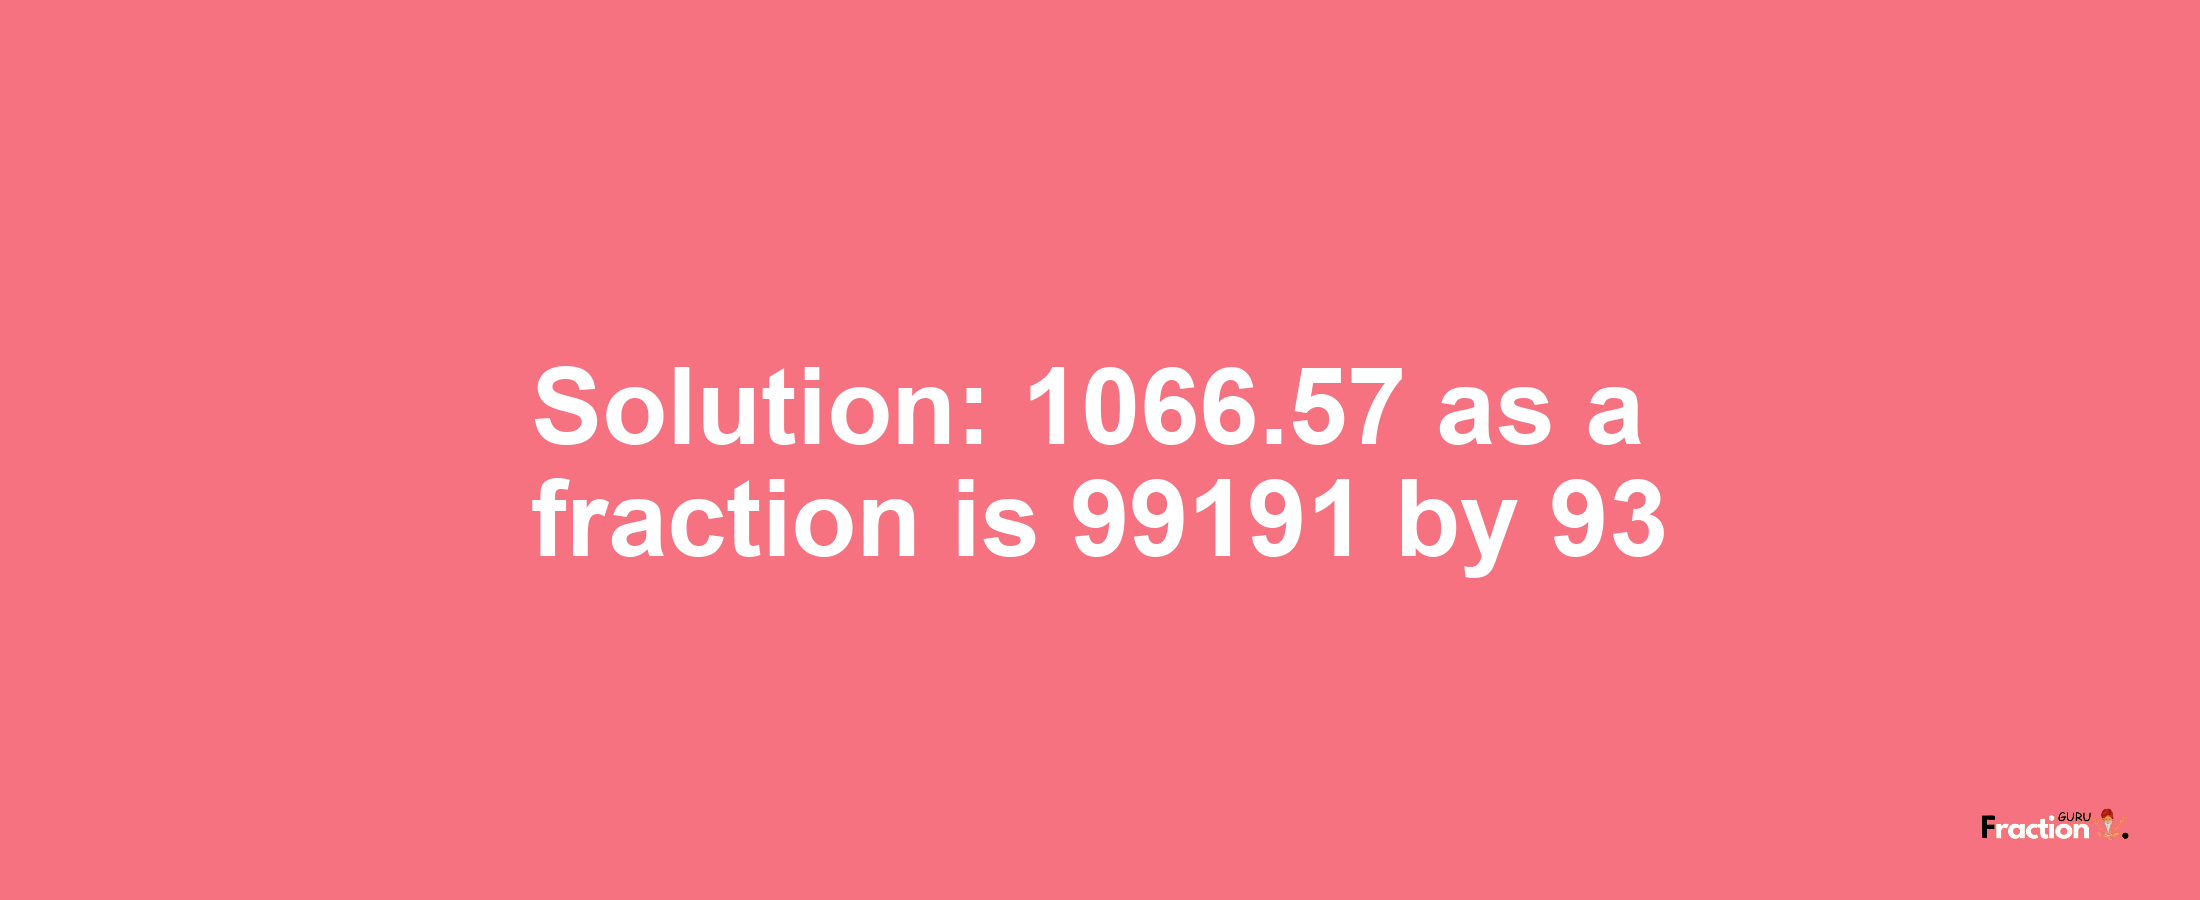 Solution:1066.57 as a fraction is 99191/93